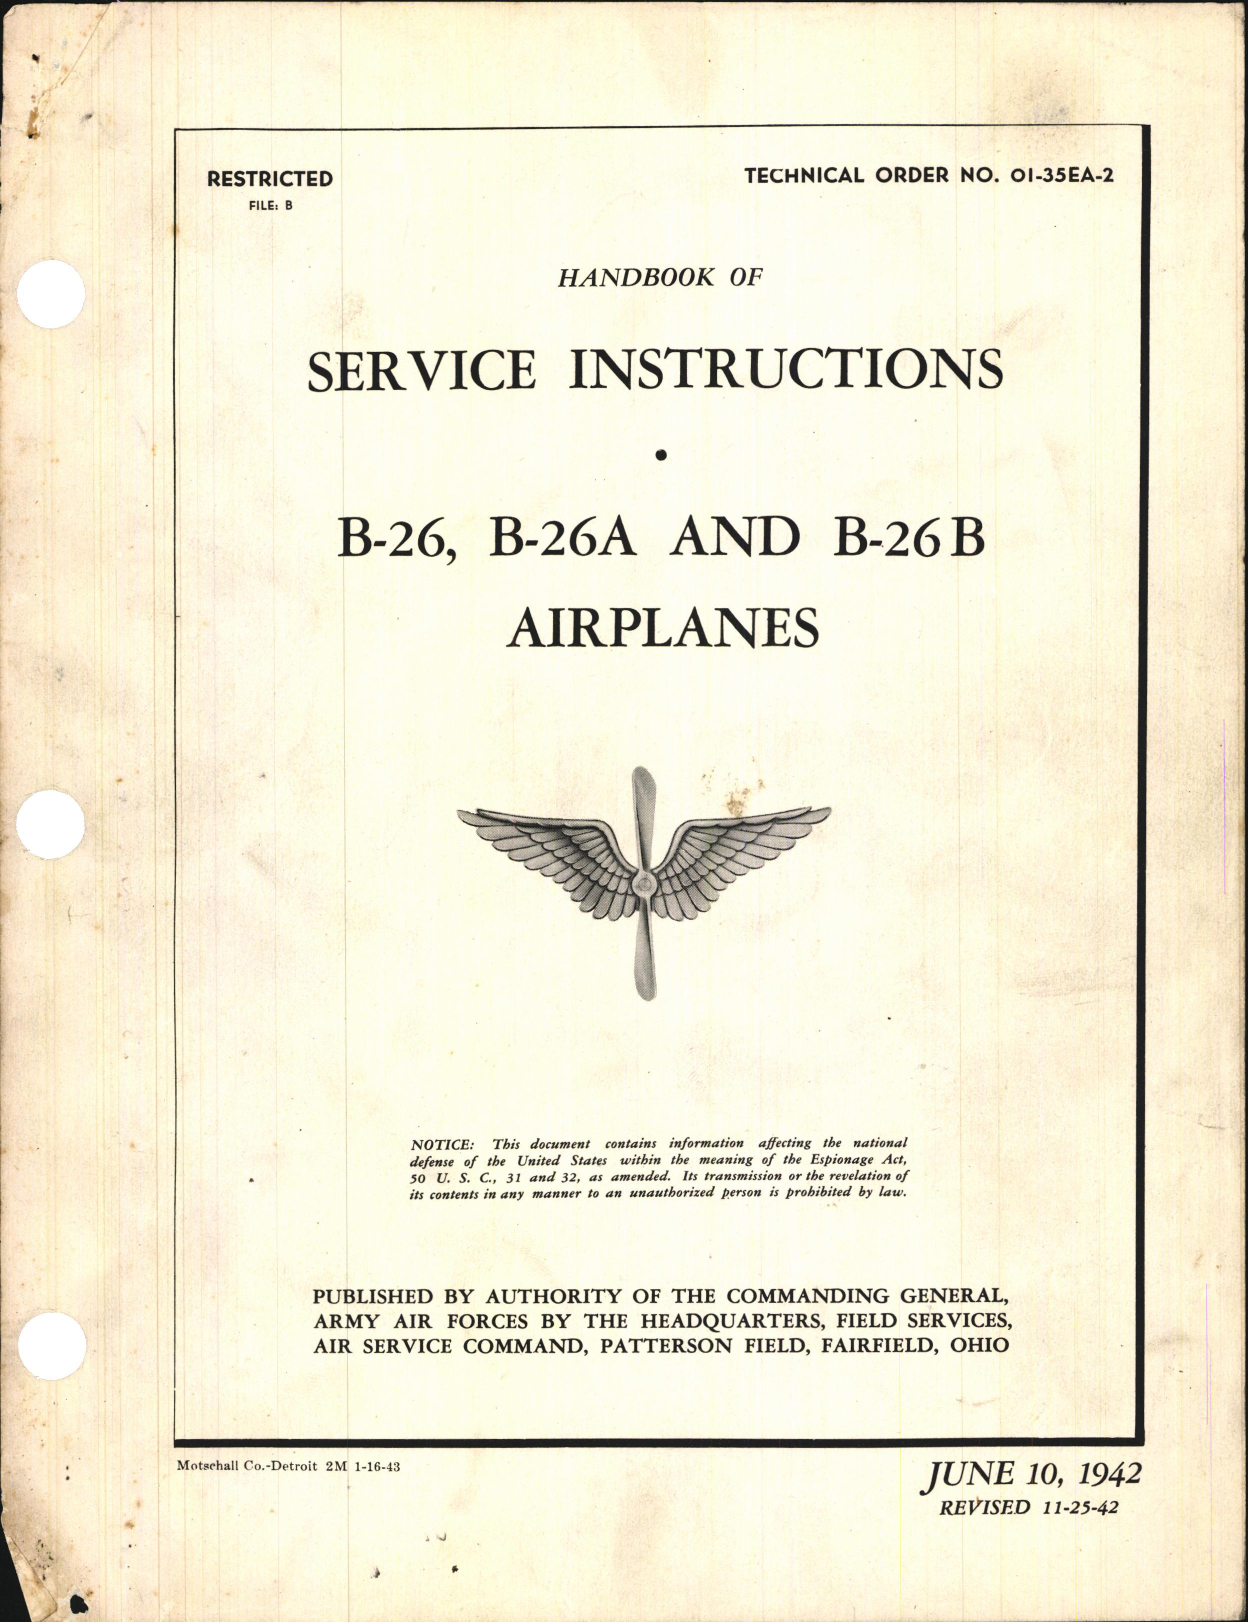 Sample page 1 from AirCorps Library document: Handbook of Service Instructions for B-26, B-26A, and B-26B Airplanes